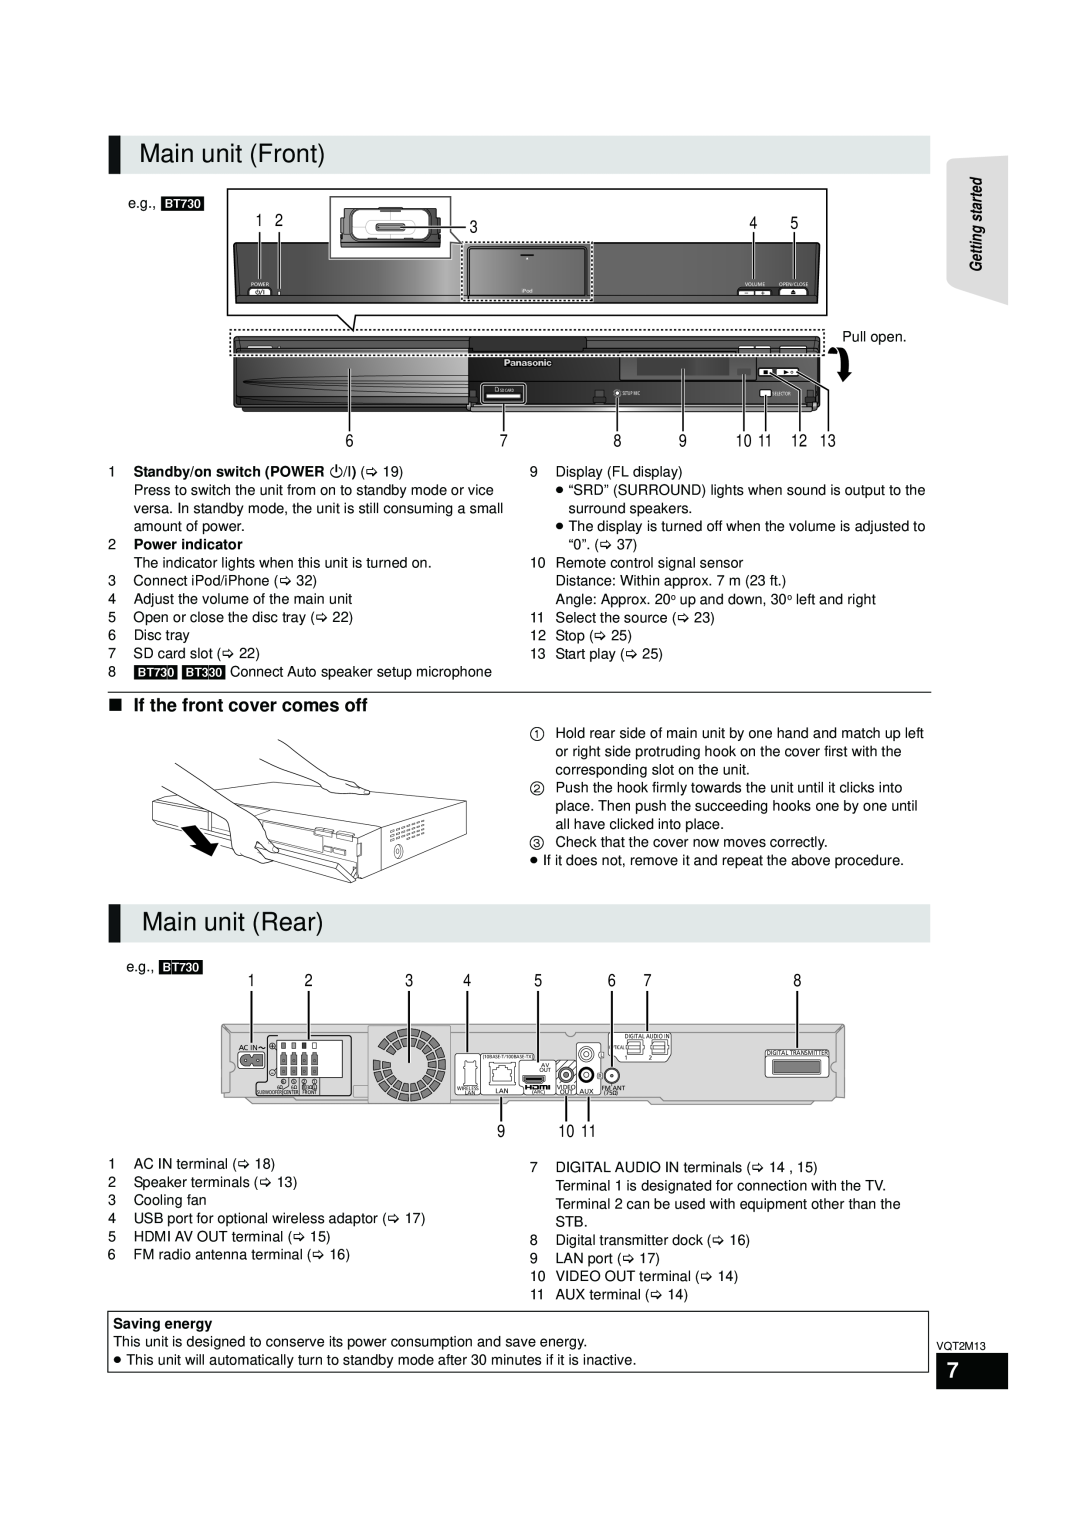 Panasonic SC-BT330, SC-BT730 operating instructions Main unit Front, Main unit Rear, If the front cover comes off 